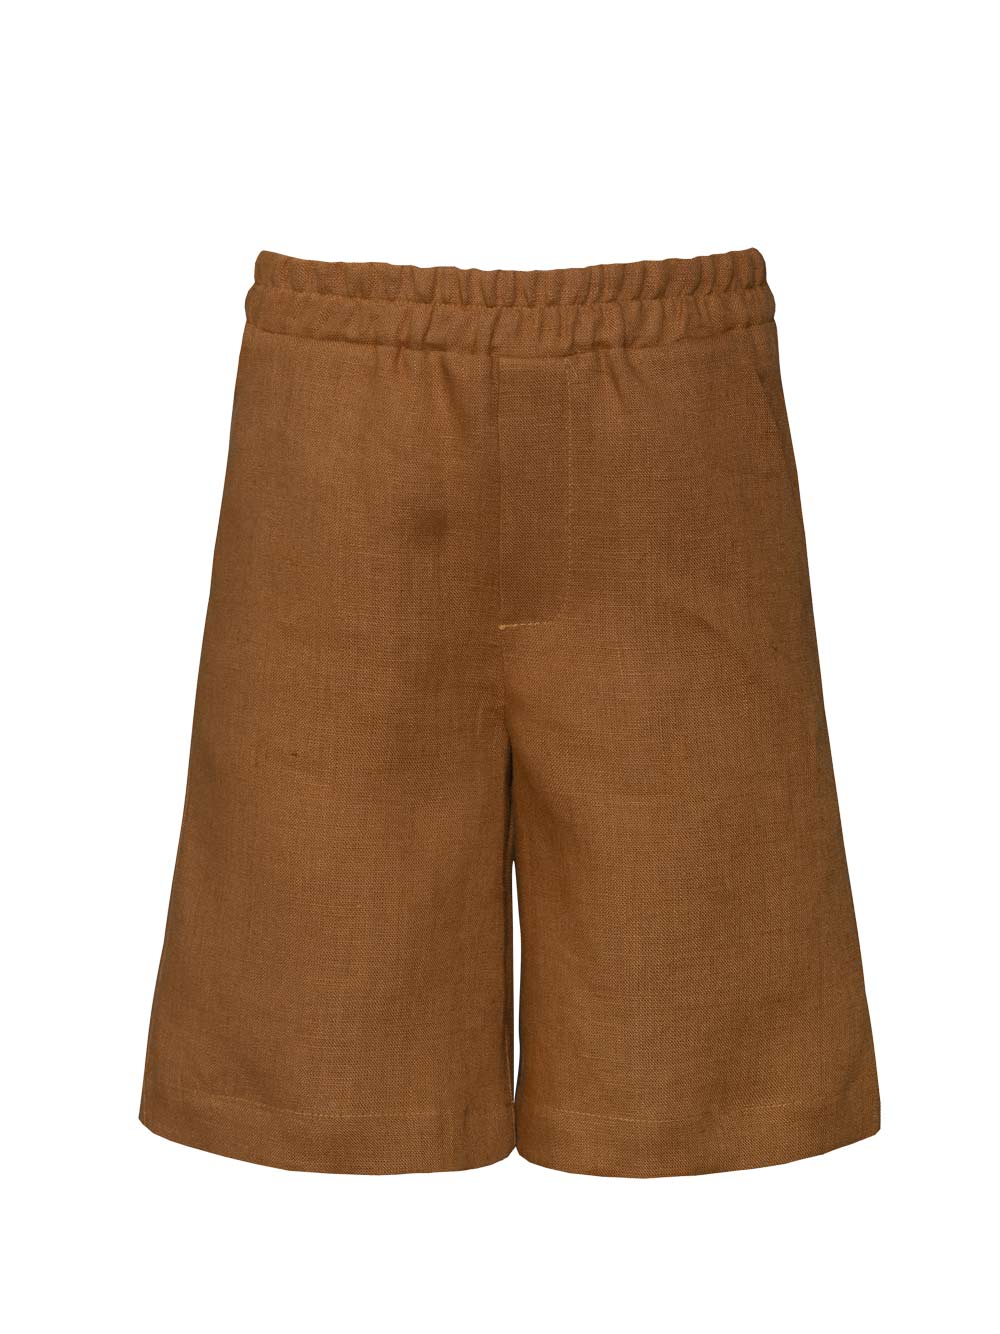 Forgetmenot Classic Brown Shorts